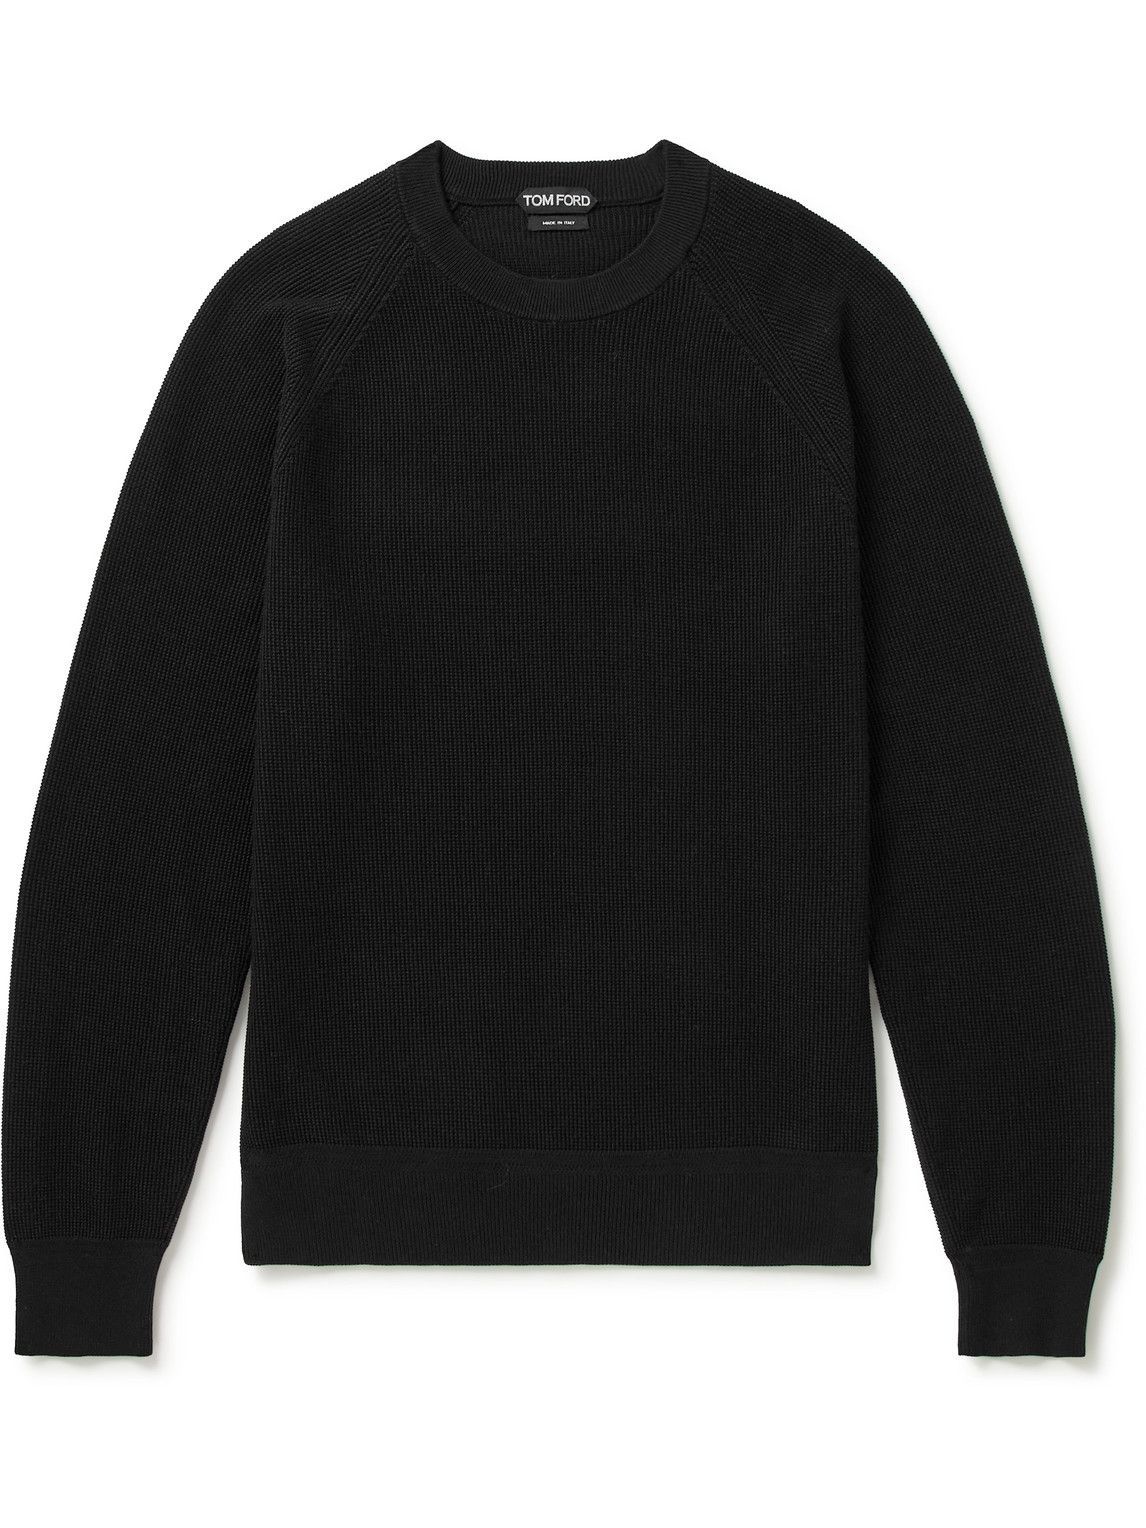 TOM FORD - Ribbed Cotton and Silk-Blend Sweater - Black TOM FORD